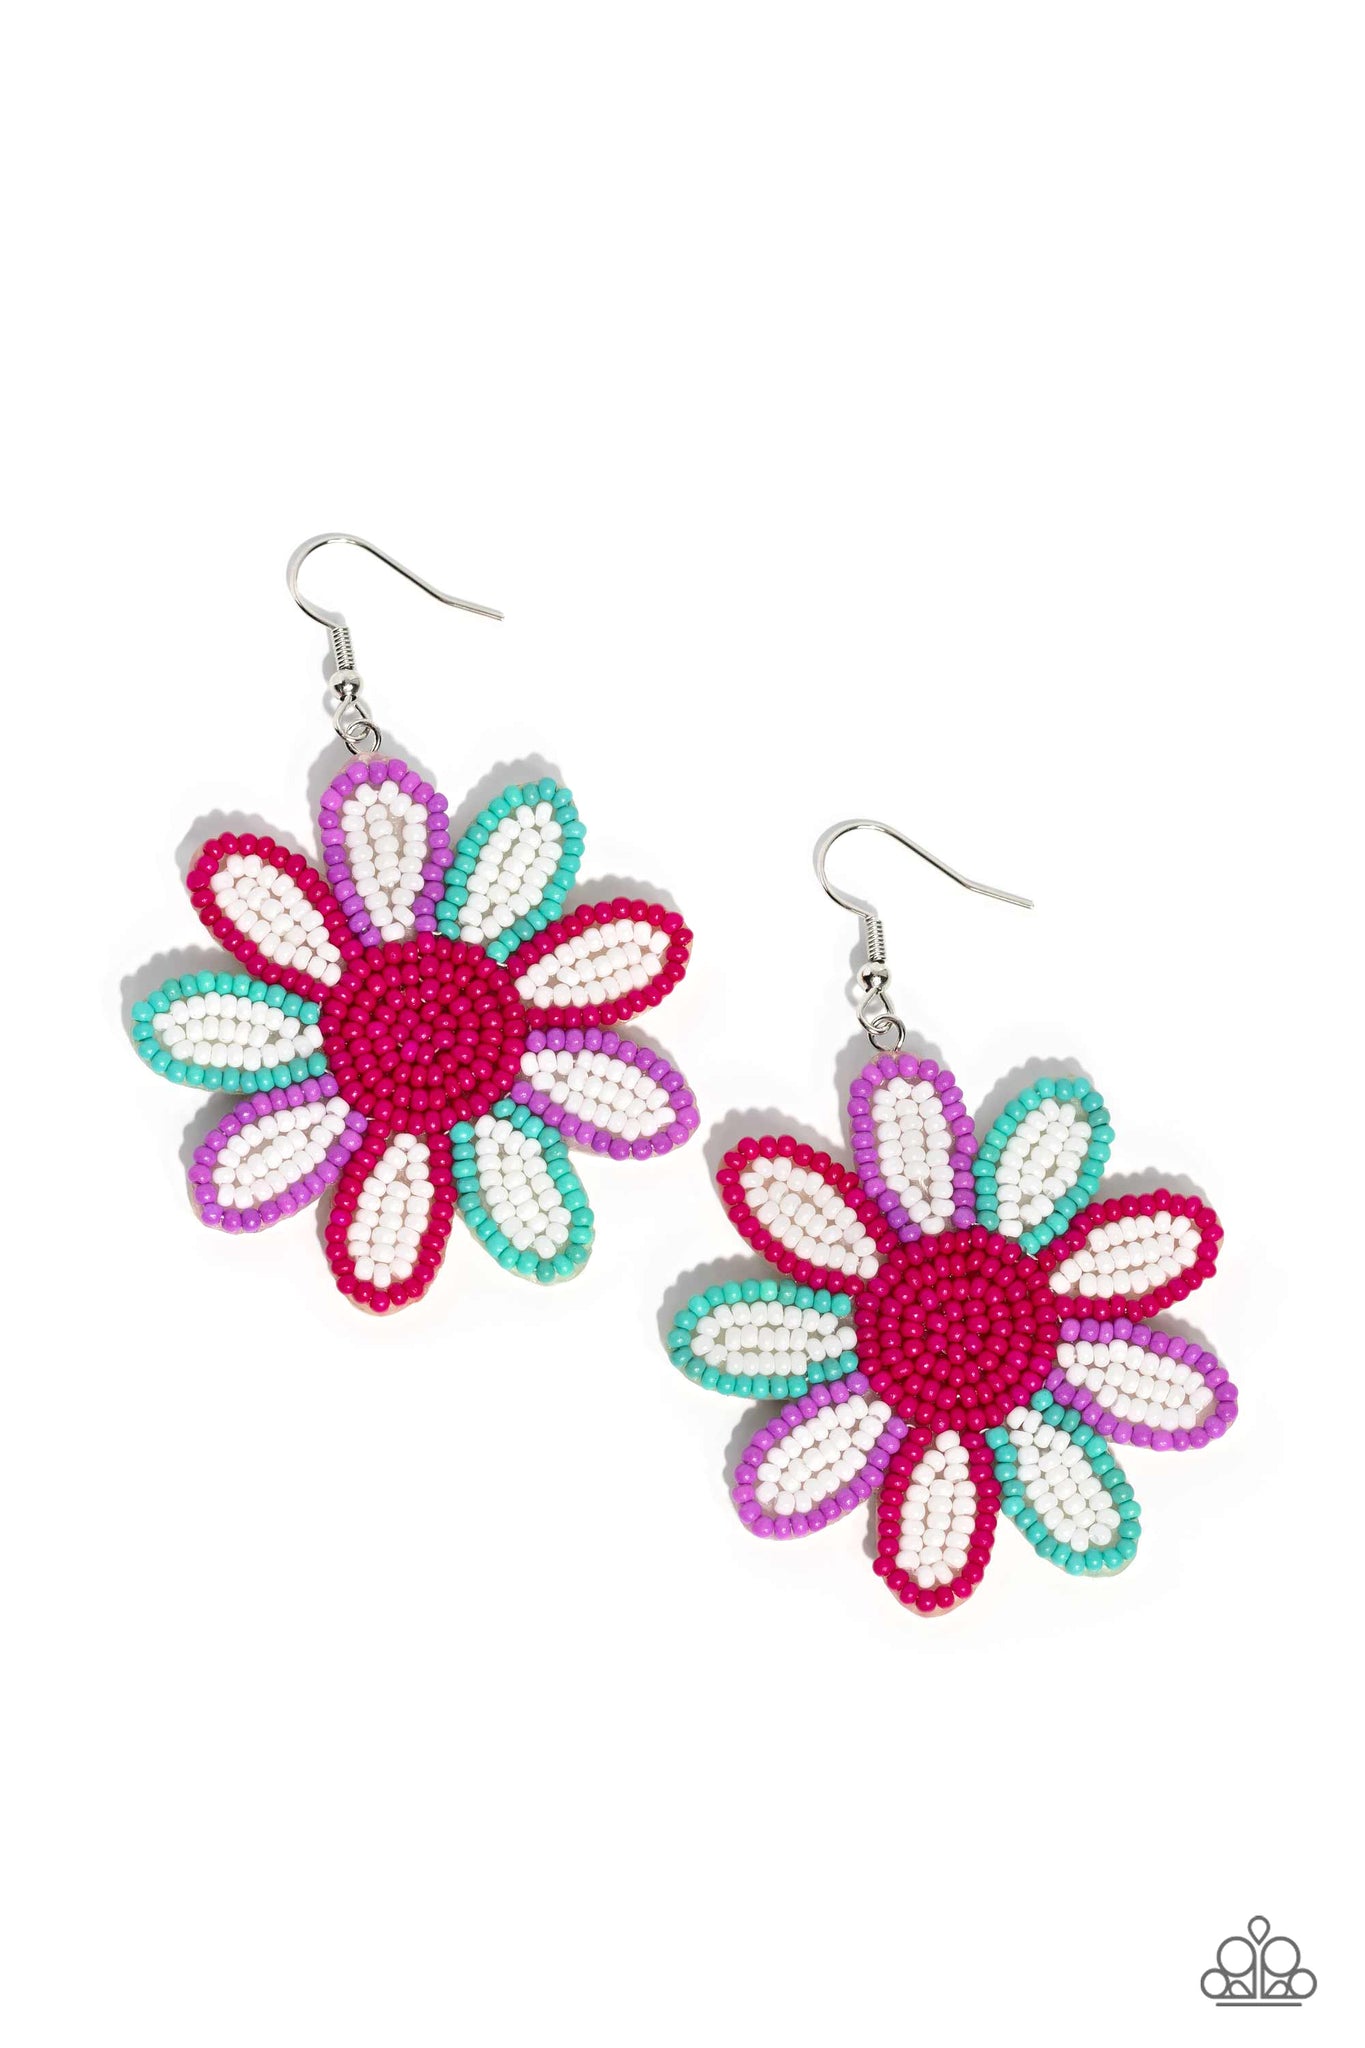 Decorated Daisies Earring (White, Pink)